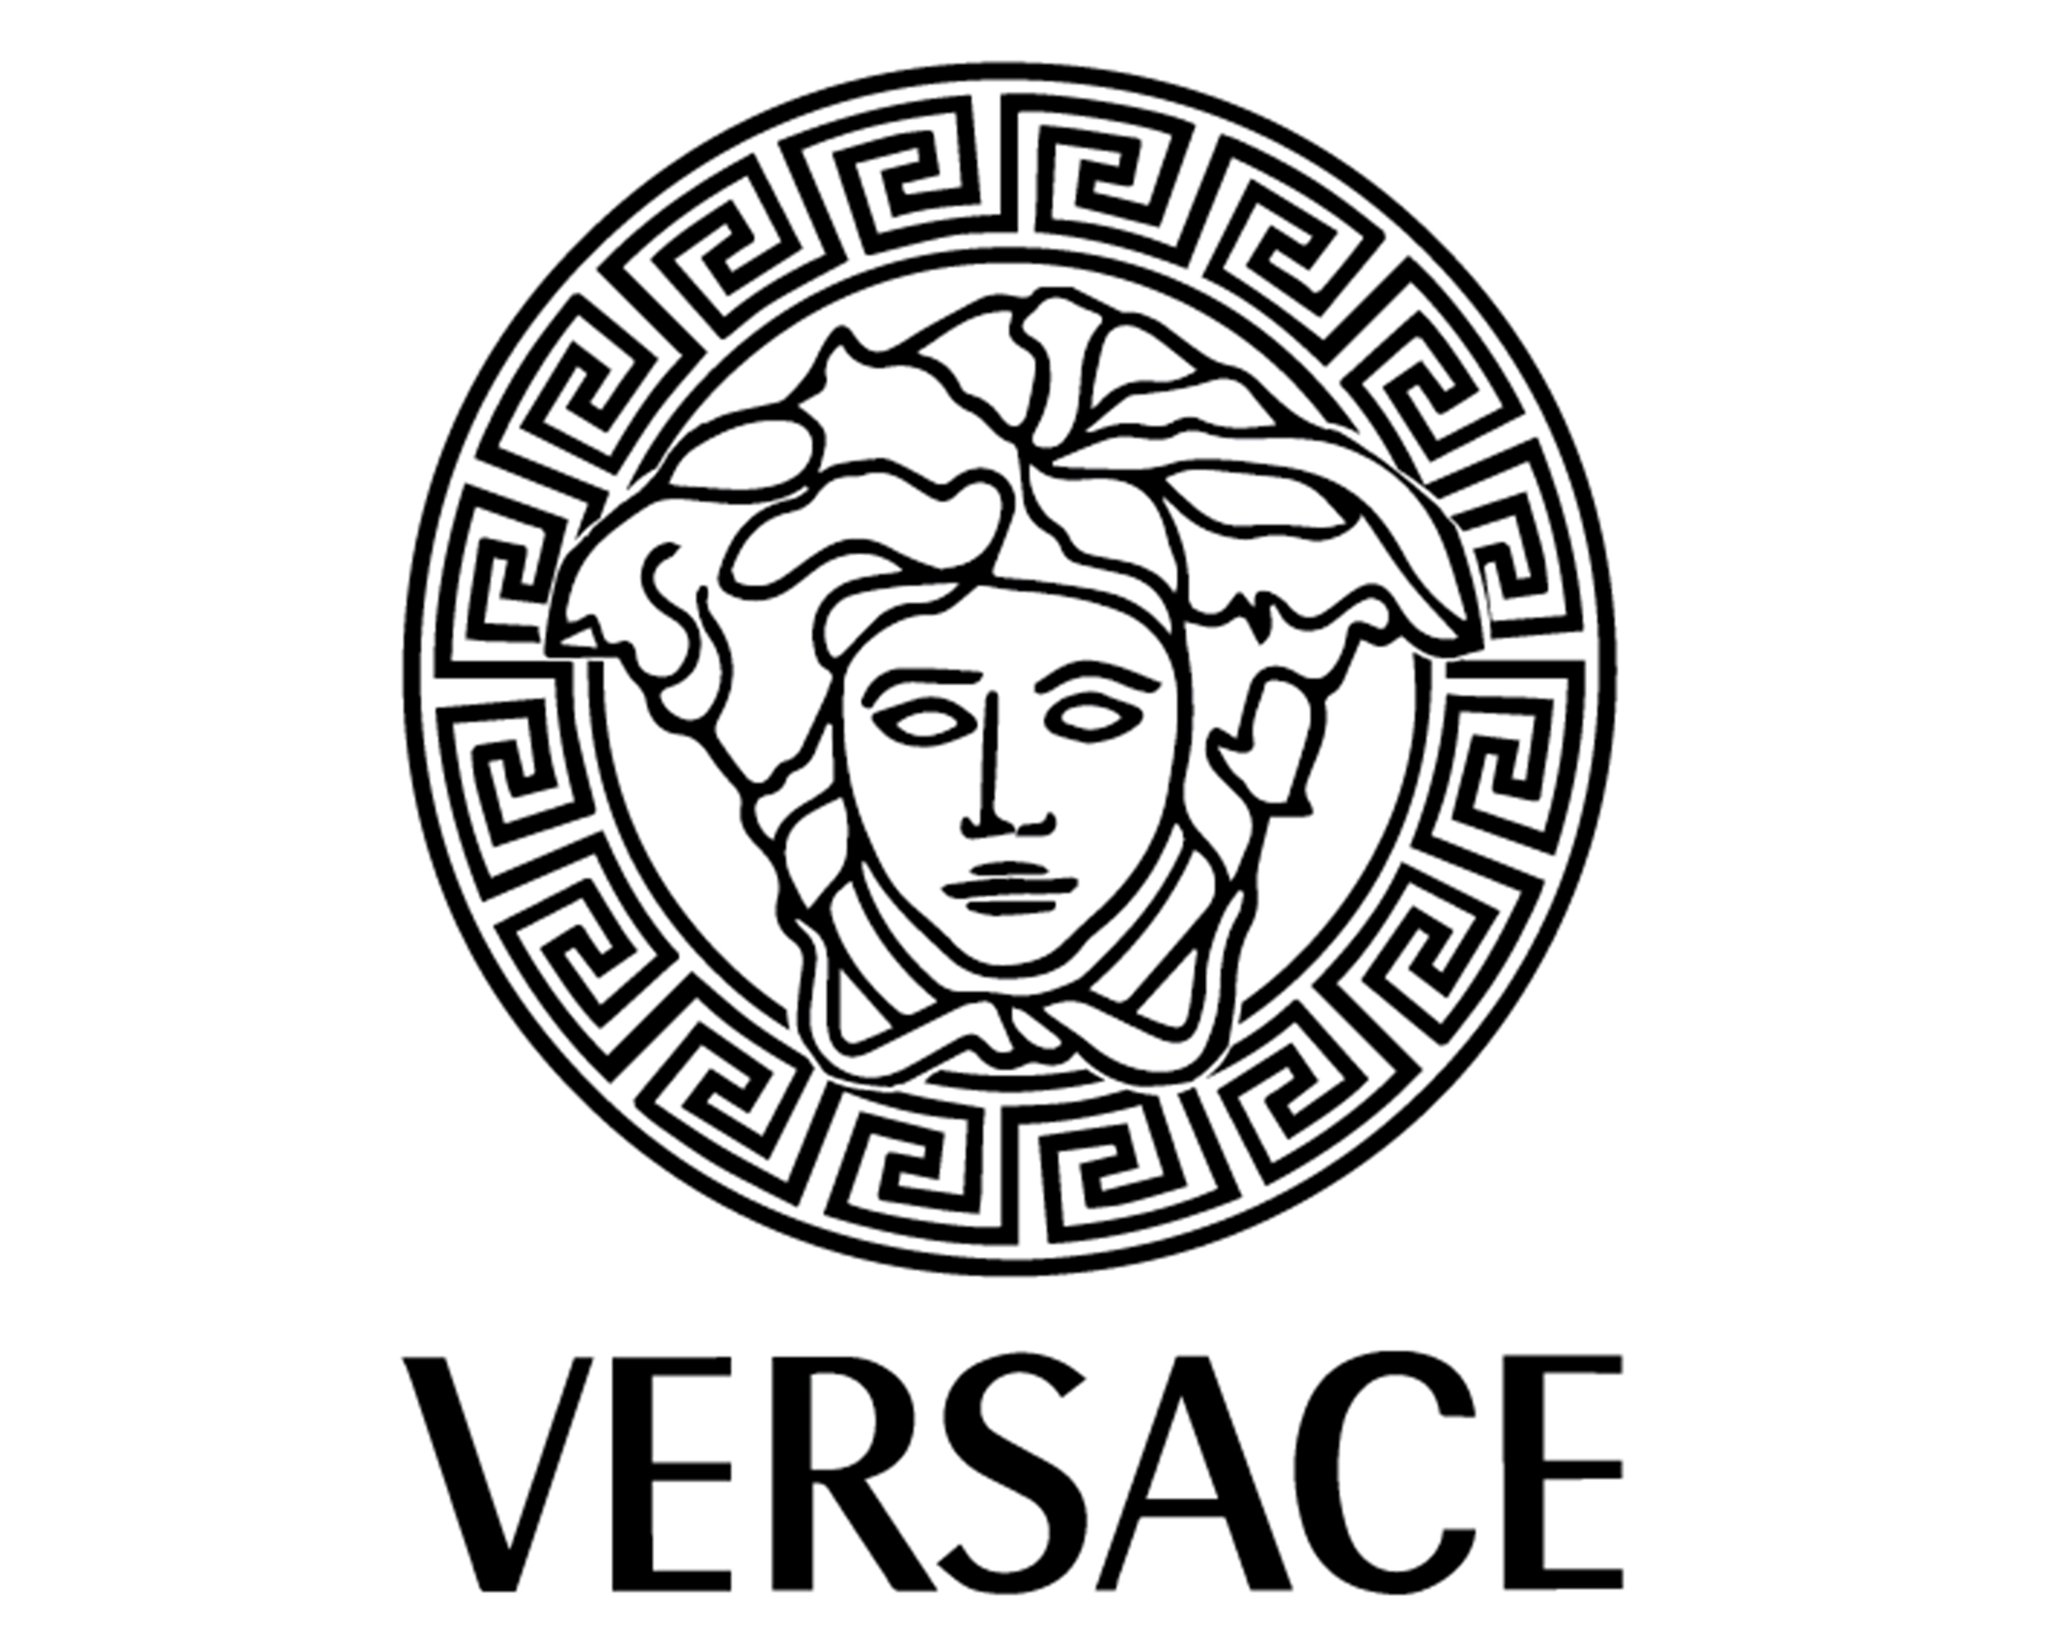 Versace Logo Drawing at GetDrawings.com | Free for personal use Versace ...